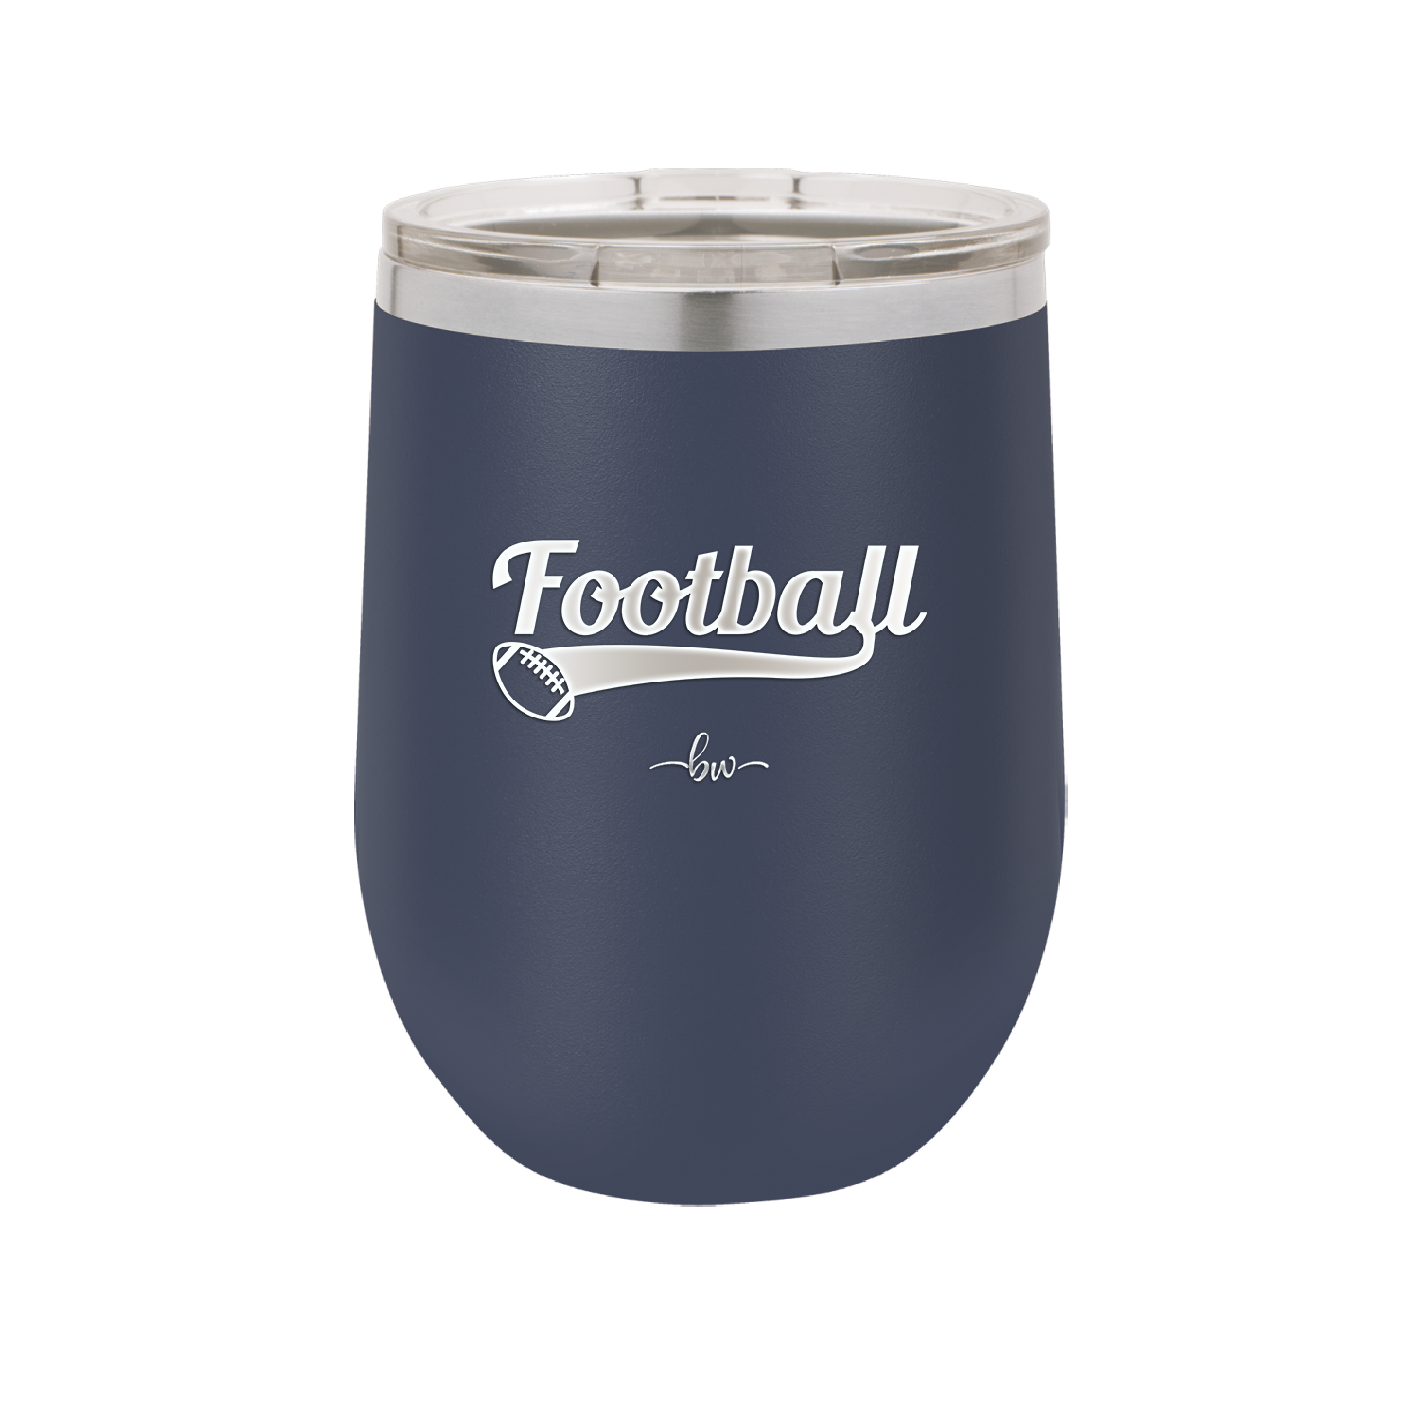 Football Text with Ball - Laser Engraved Stainless Steel Drinkware - 1891 -